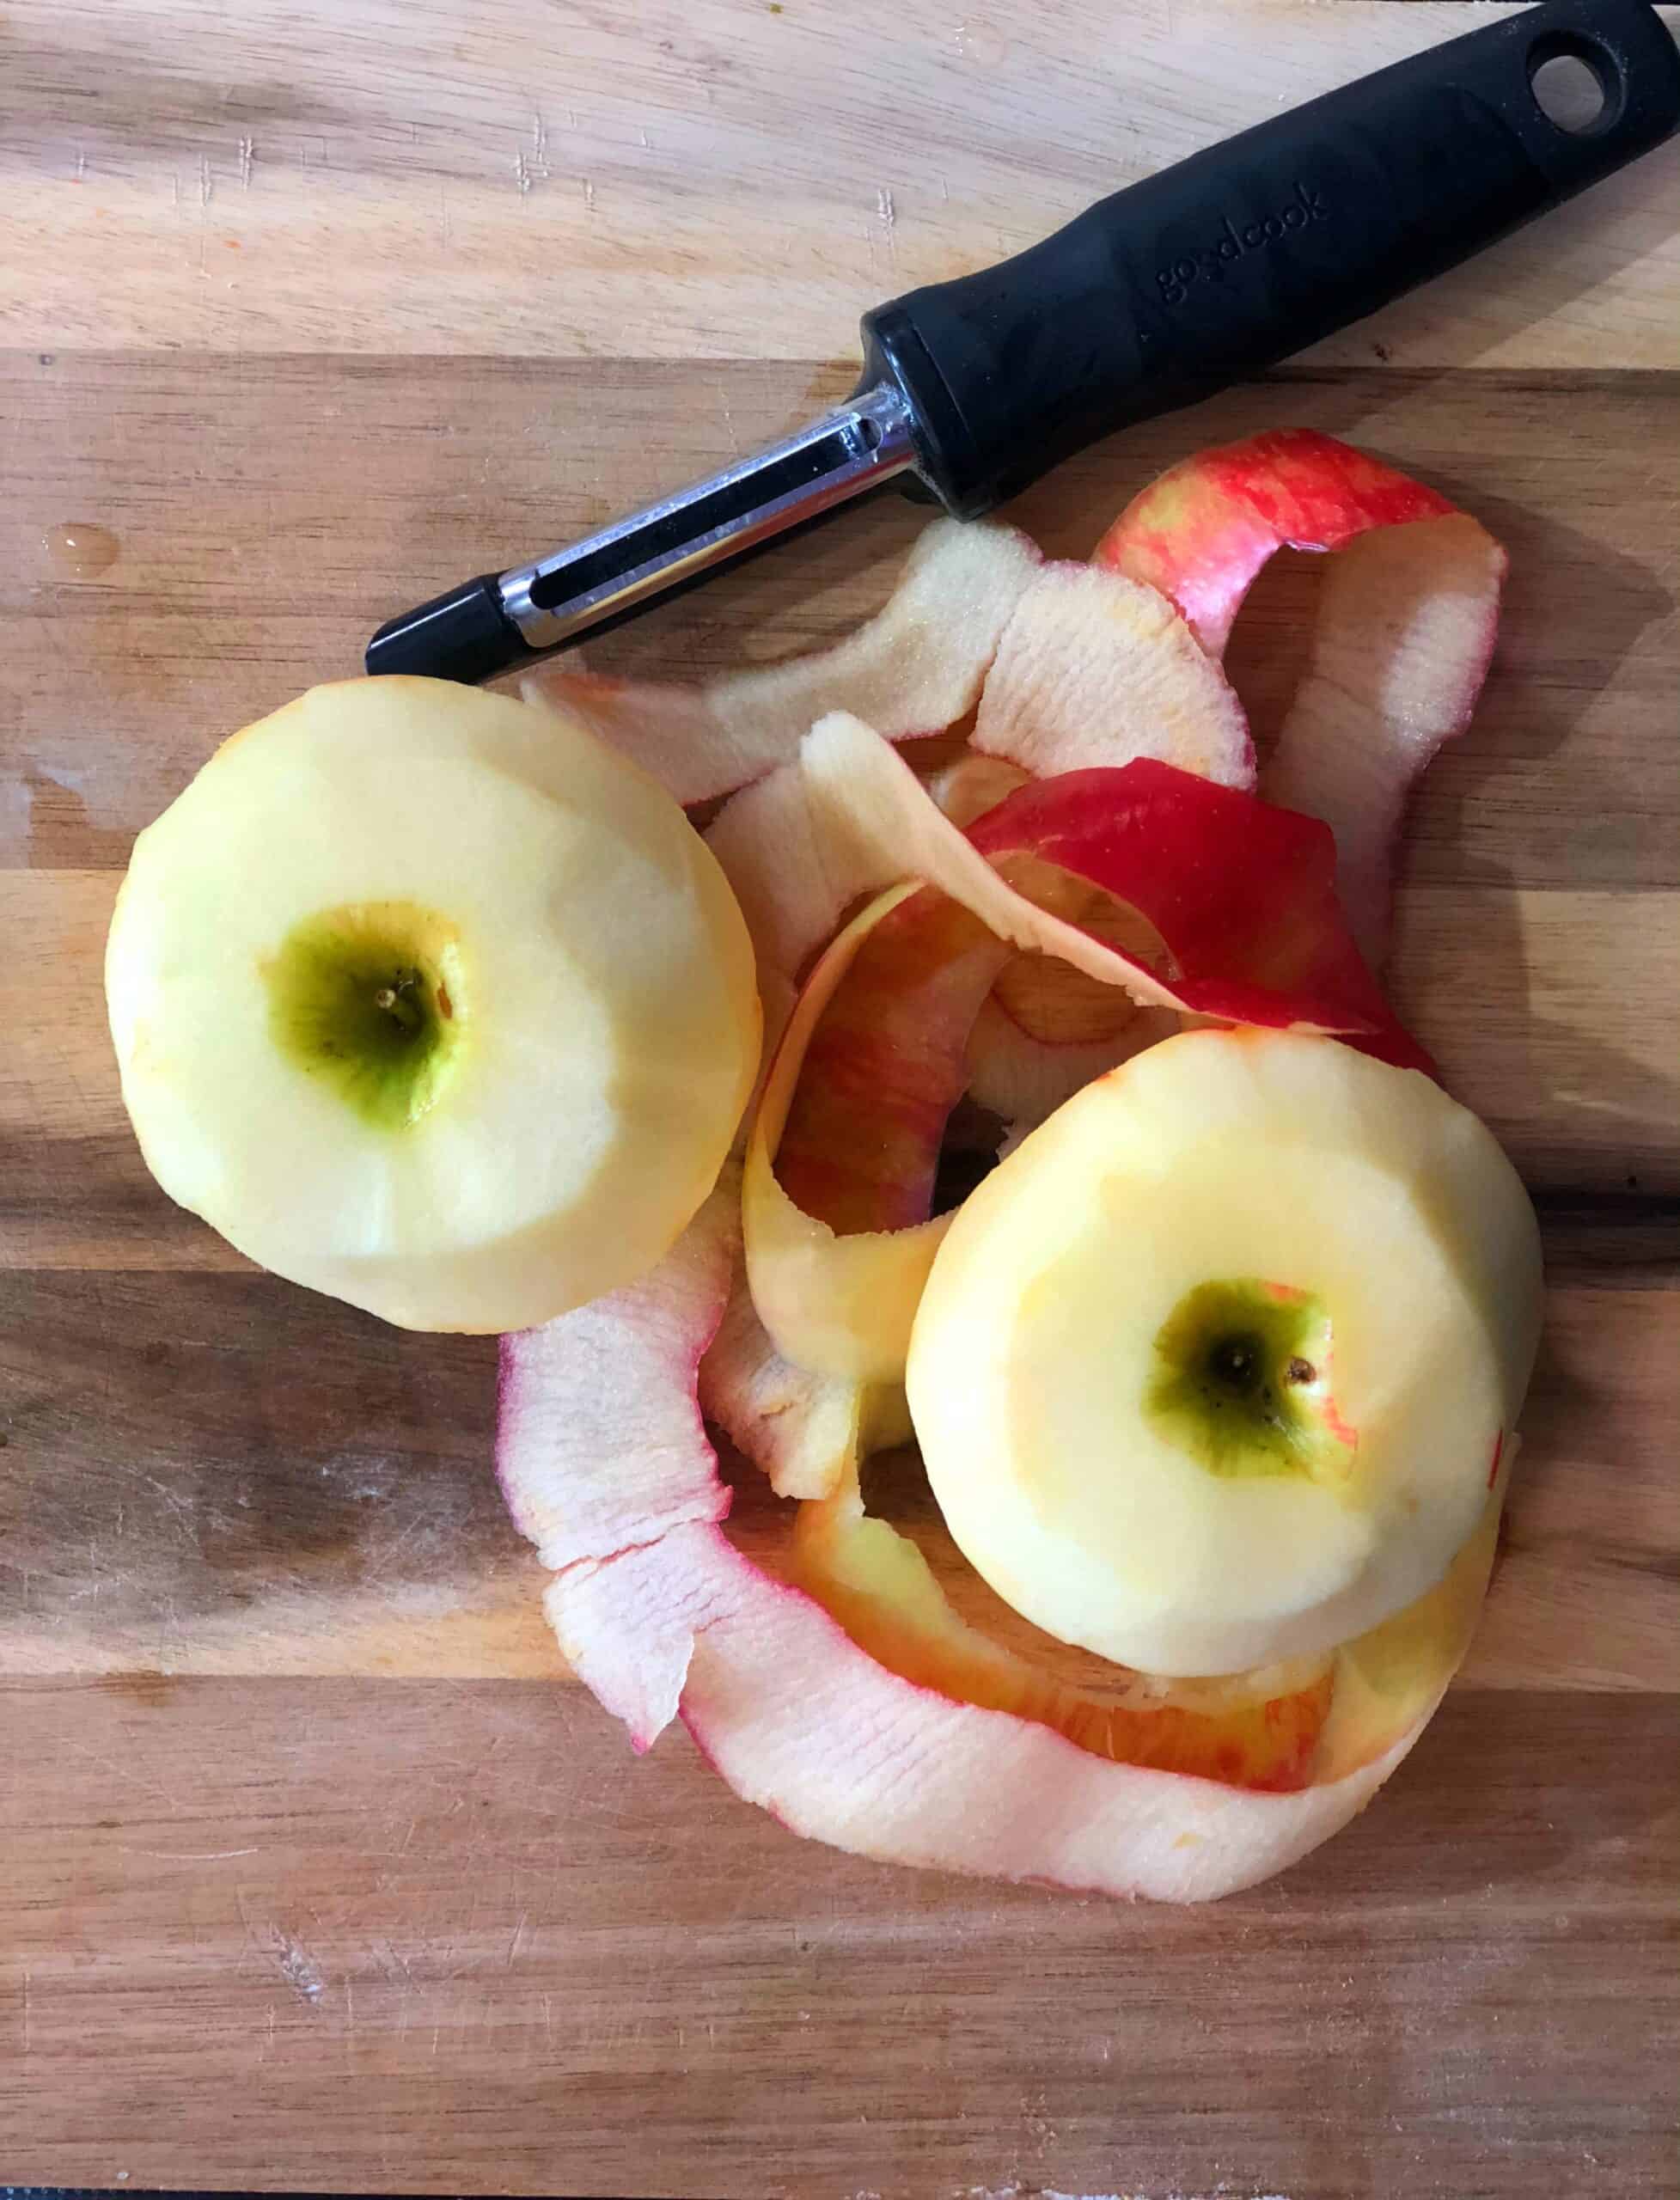 Peeled Apples next to a vegetable peeler.